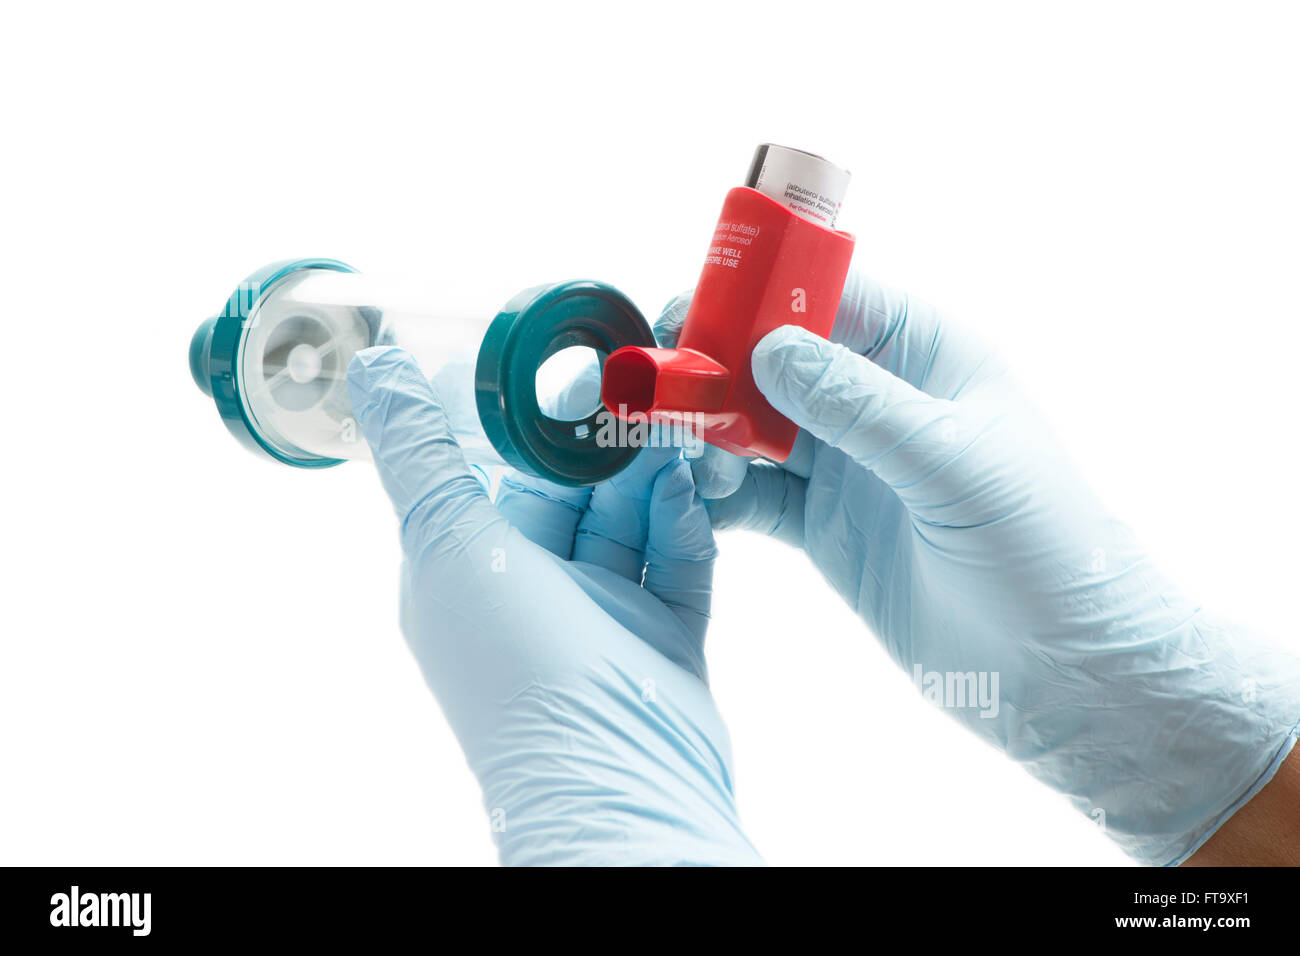 Nurse attaches spacer chamber to asthma inhaler.  Albuterol is a common medication name. Stock Photo